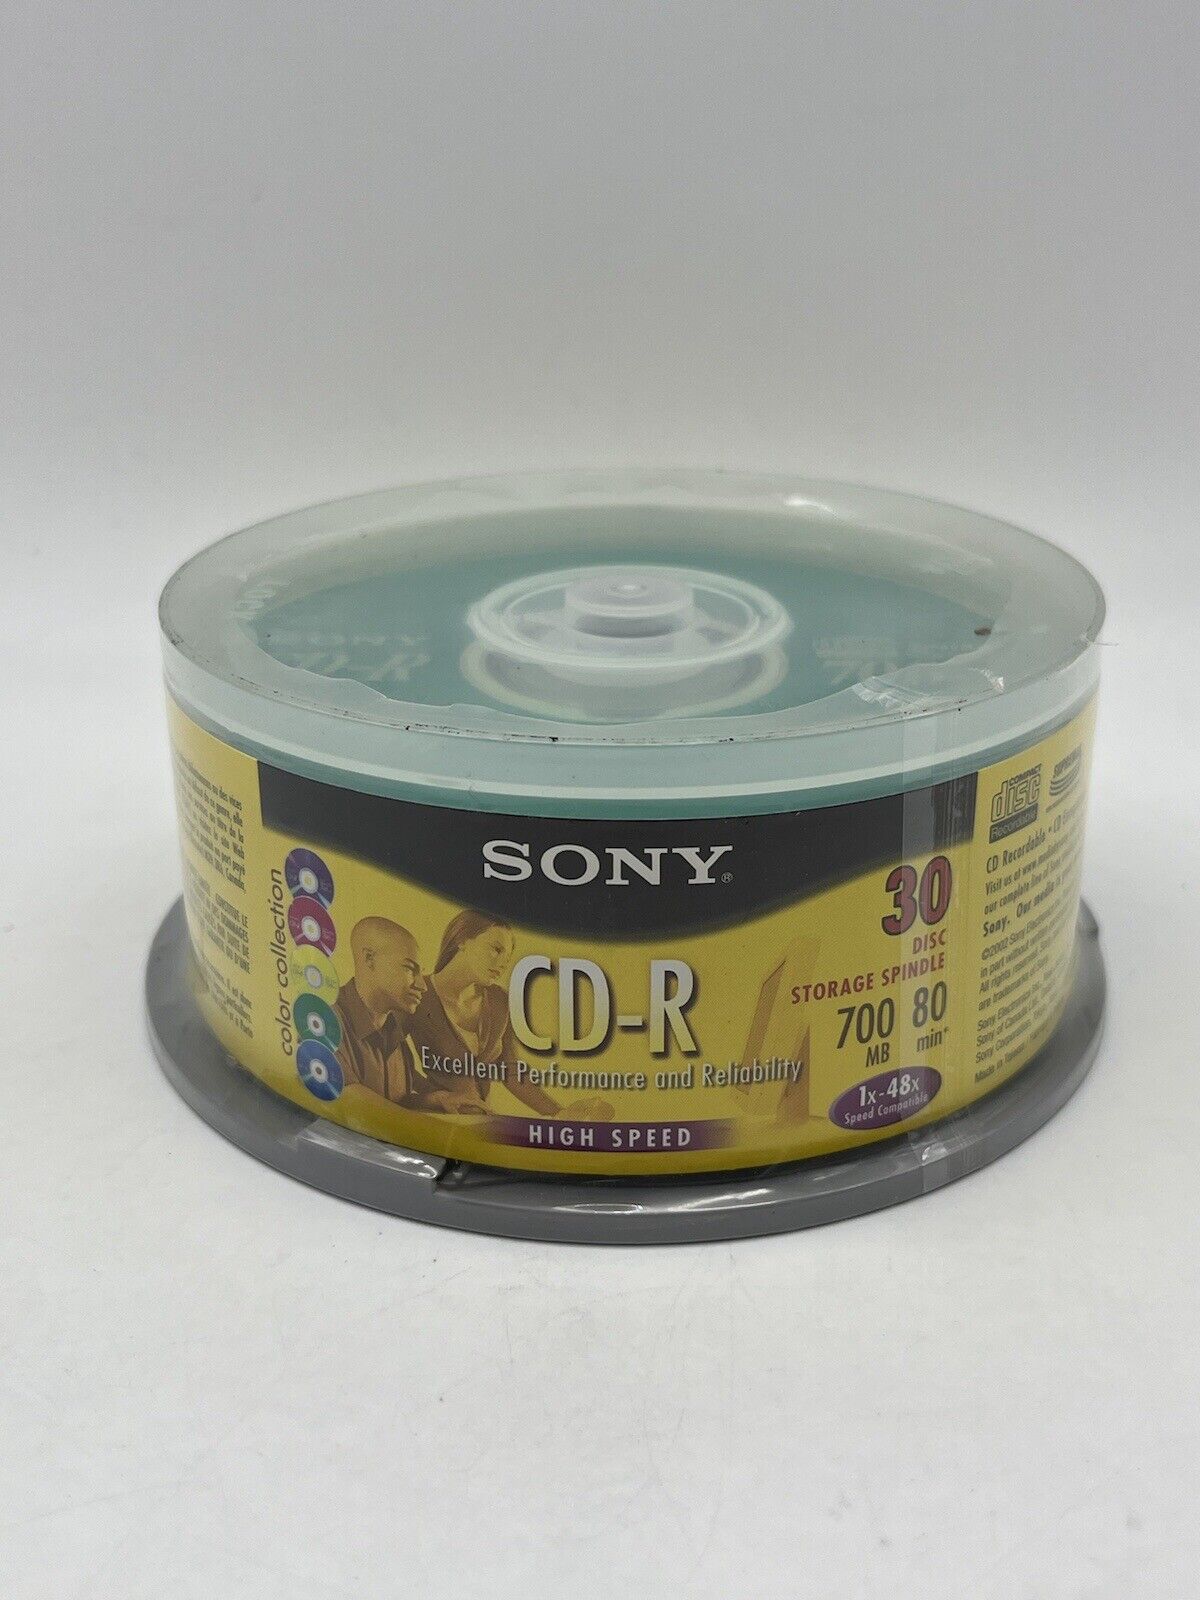 Sony CD-R 30CDQ80LSX3 30-Pack Color Collection 700 MB 80 Min 1x-48x High Speed